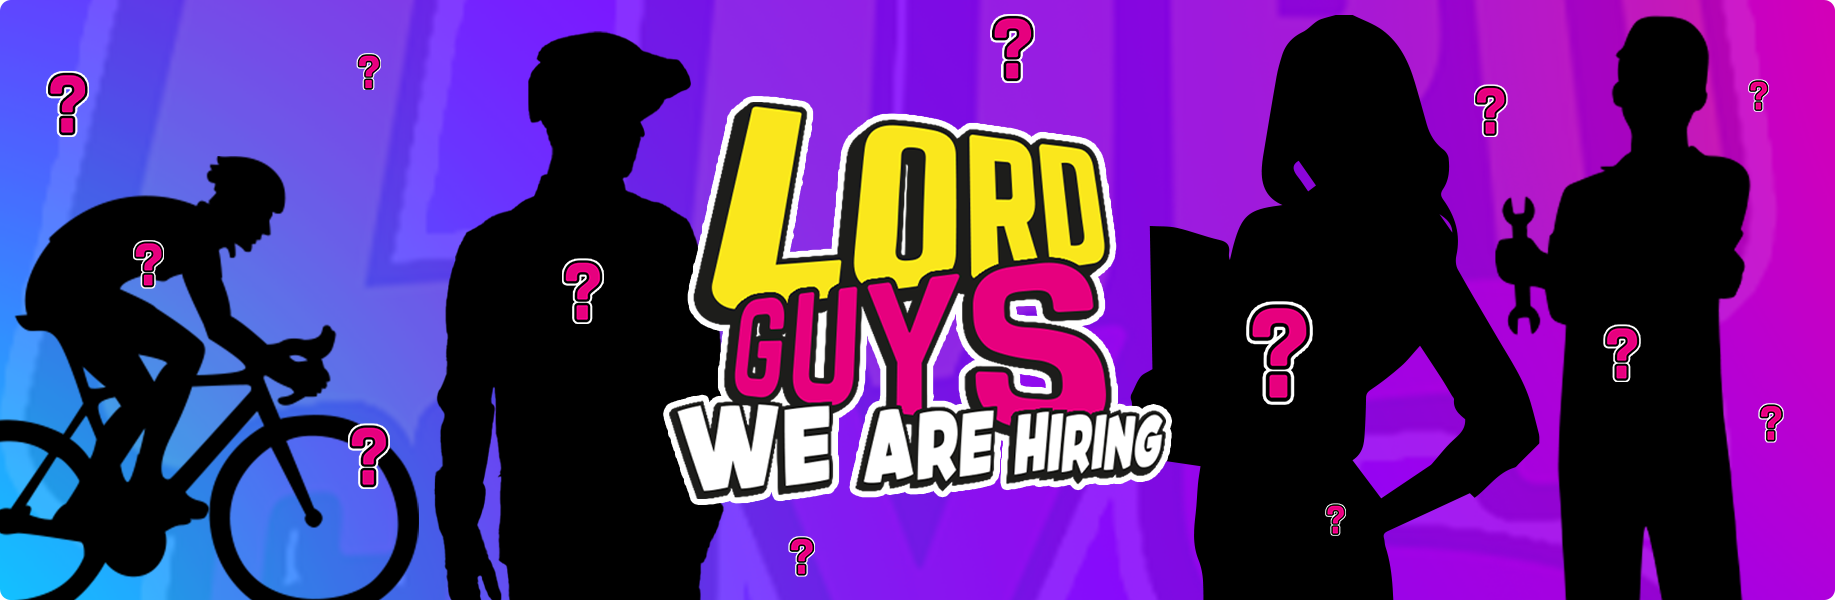 LordGun: want to work with us?